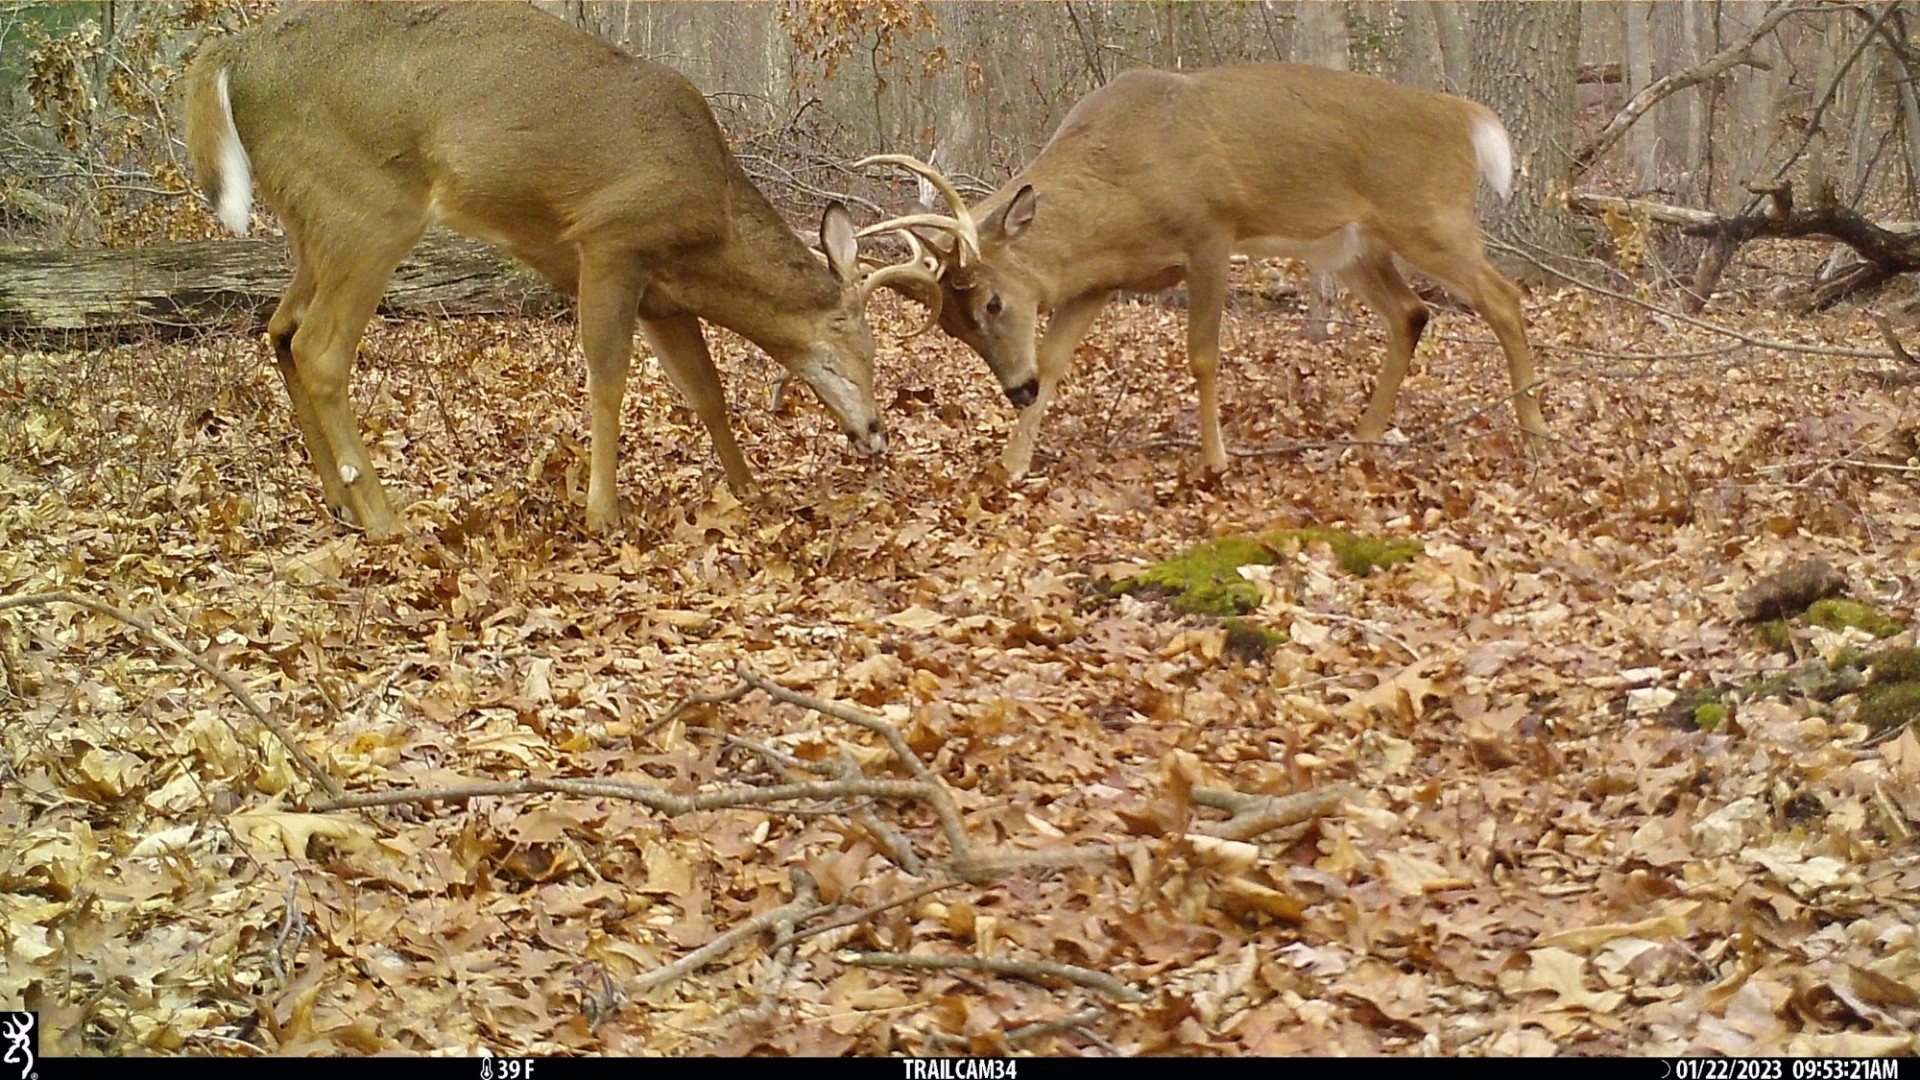 Trail camera photo of two deer locking horns in the woods.